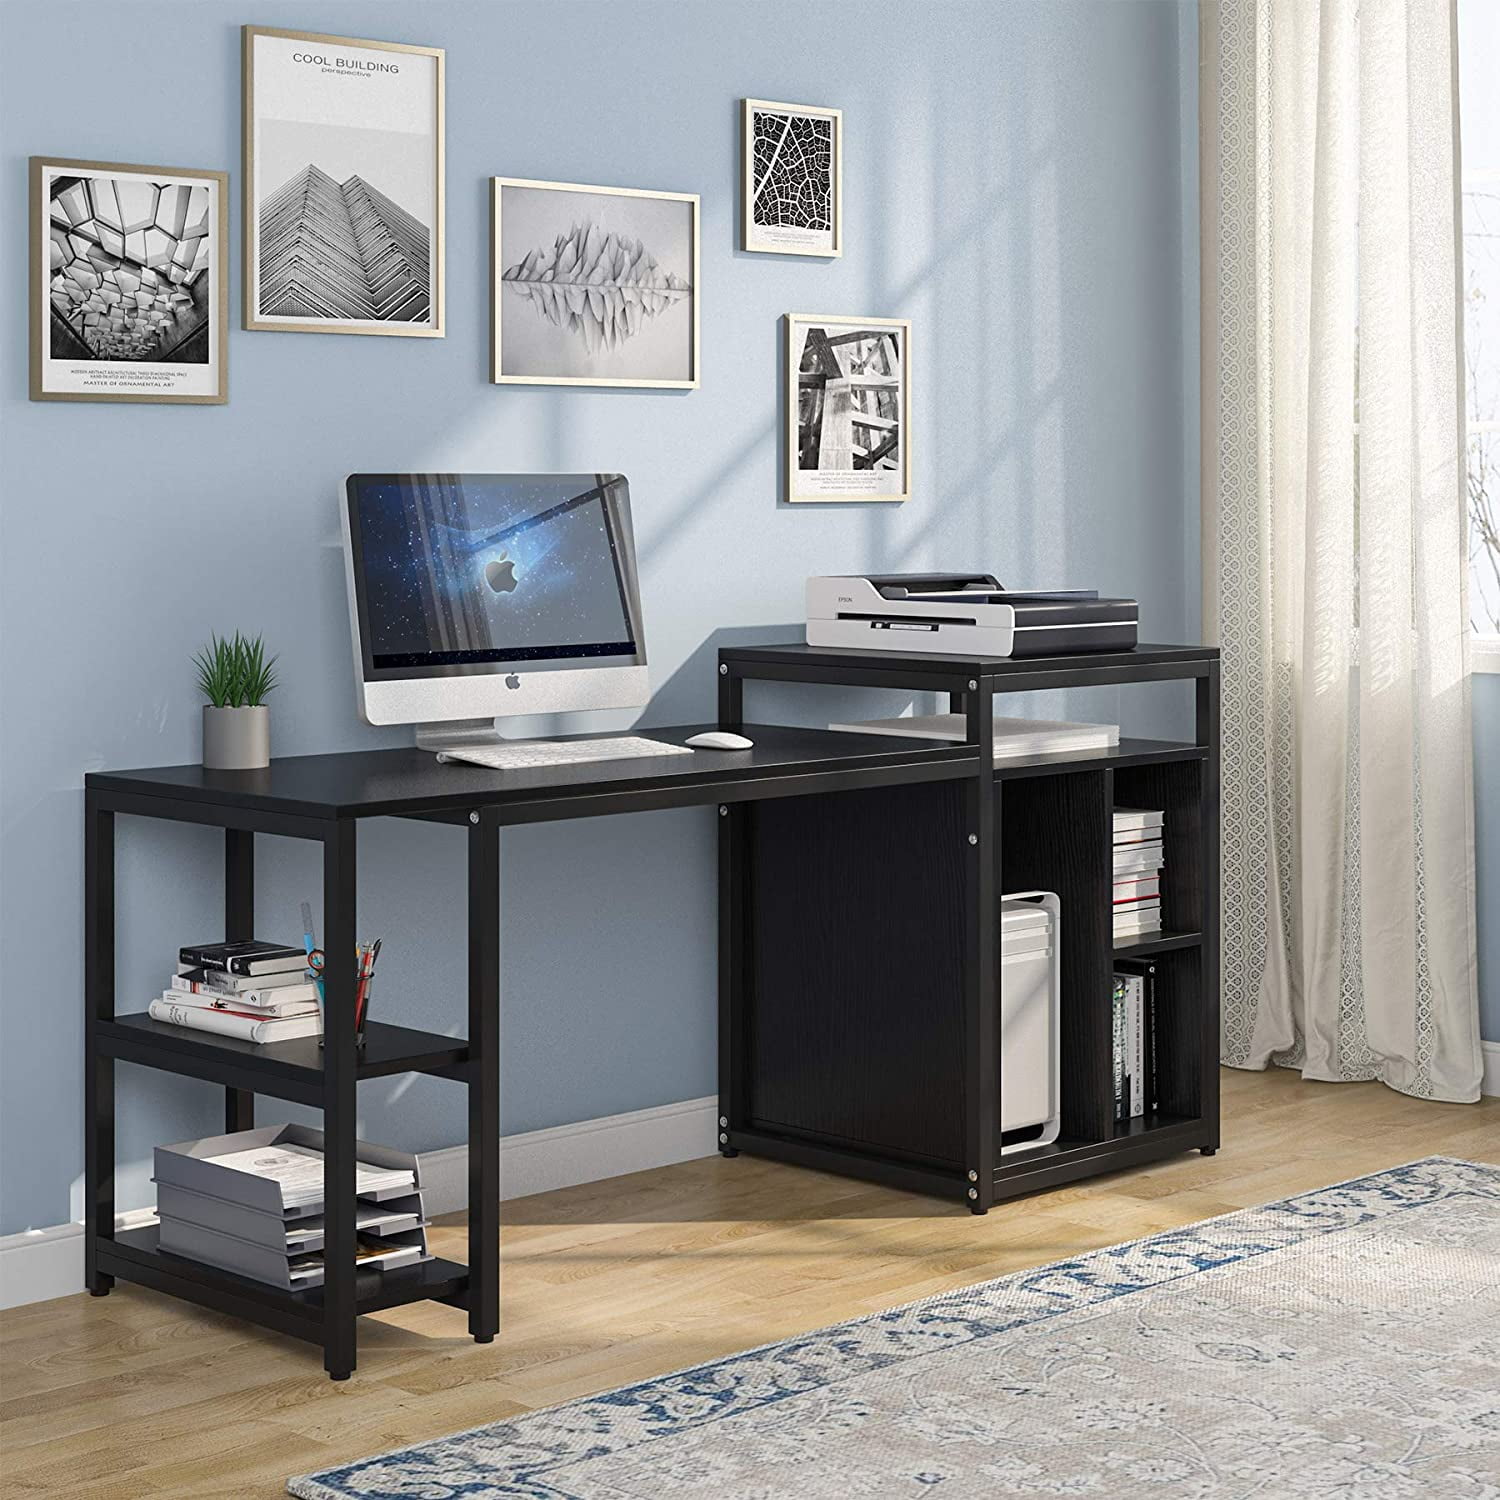 Minimalist Computer Desk With Bookcase with Simple Decor